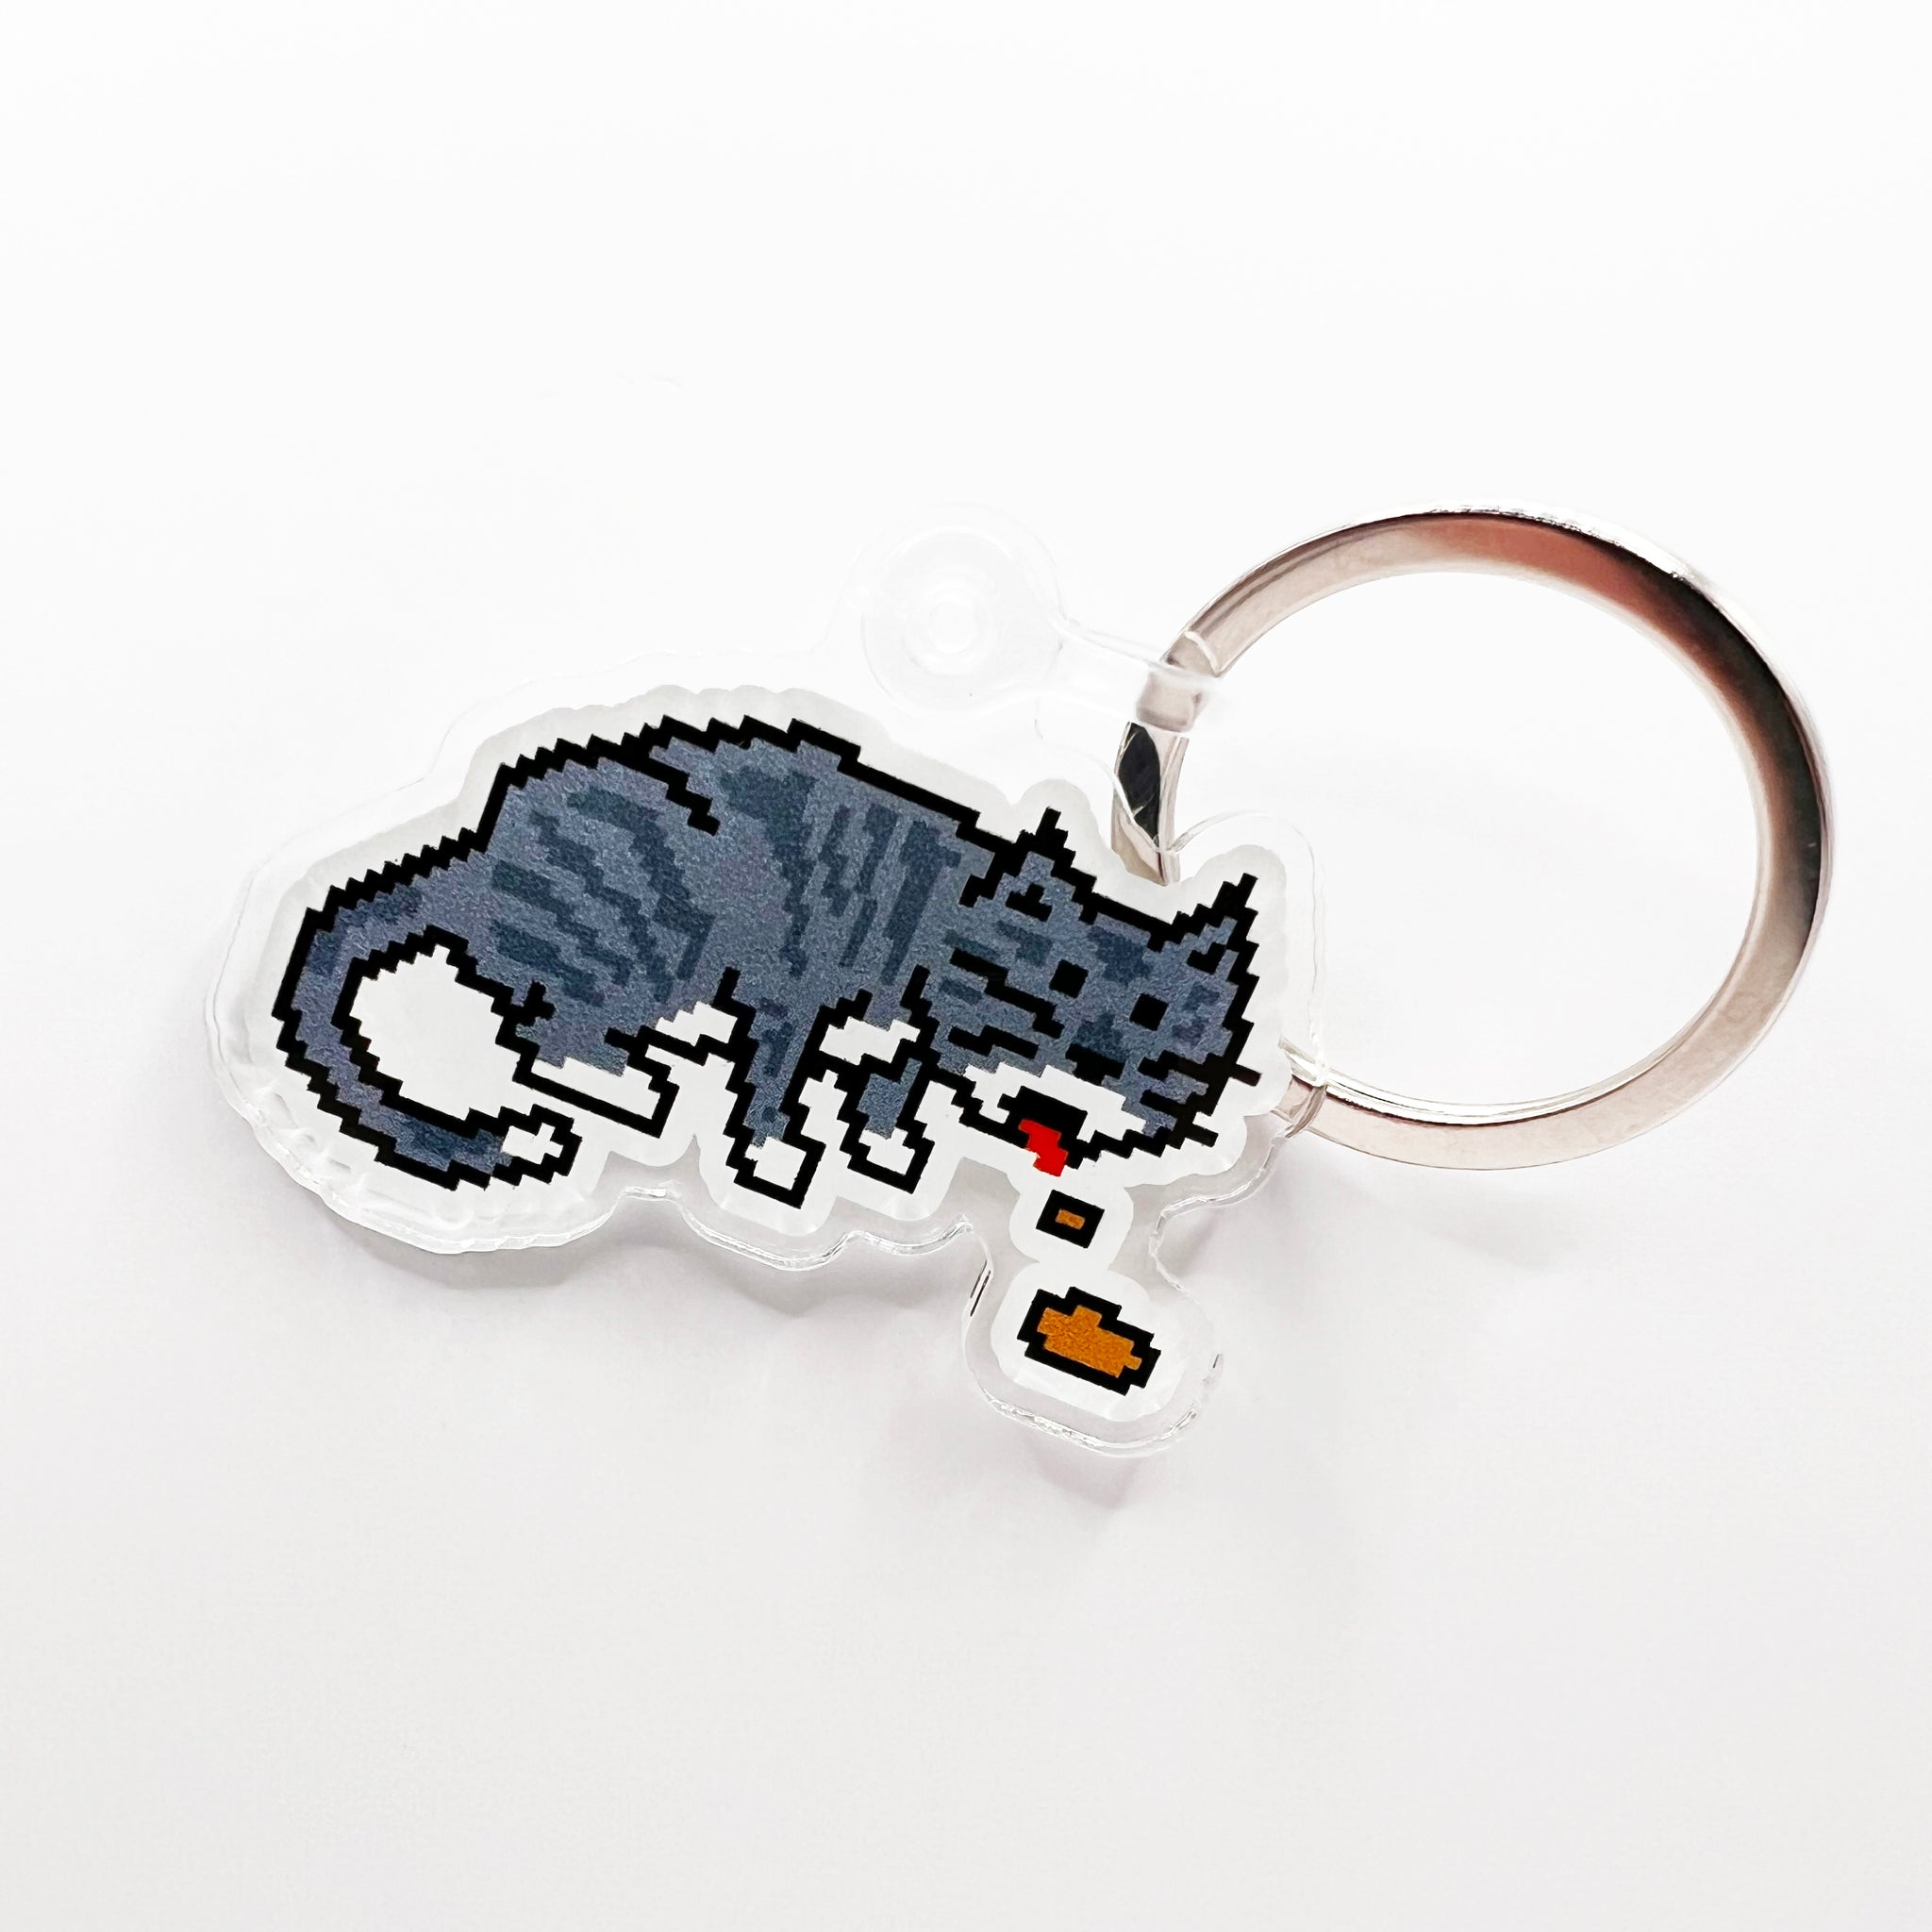 THE CAT'S MEOW KEYCHAIN